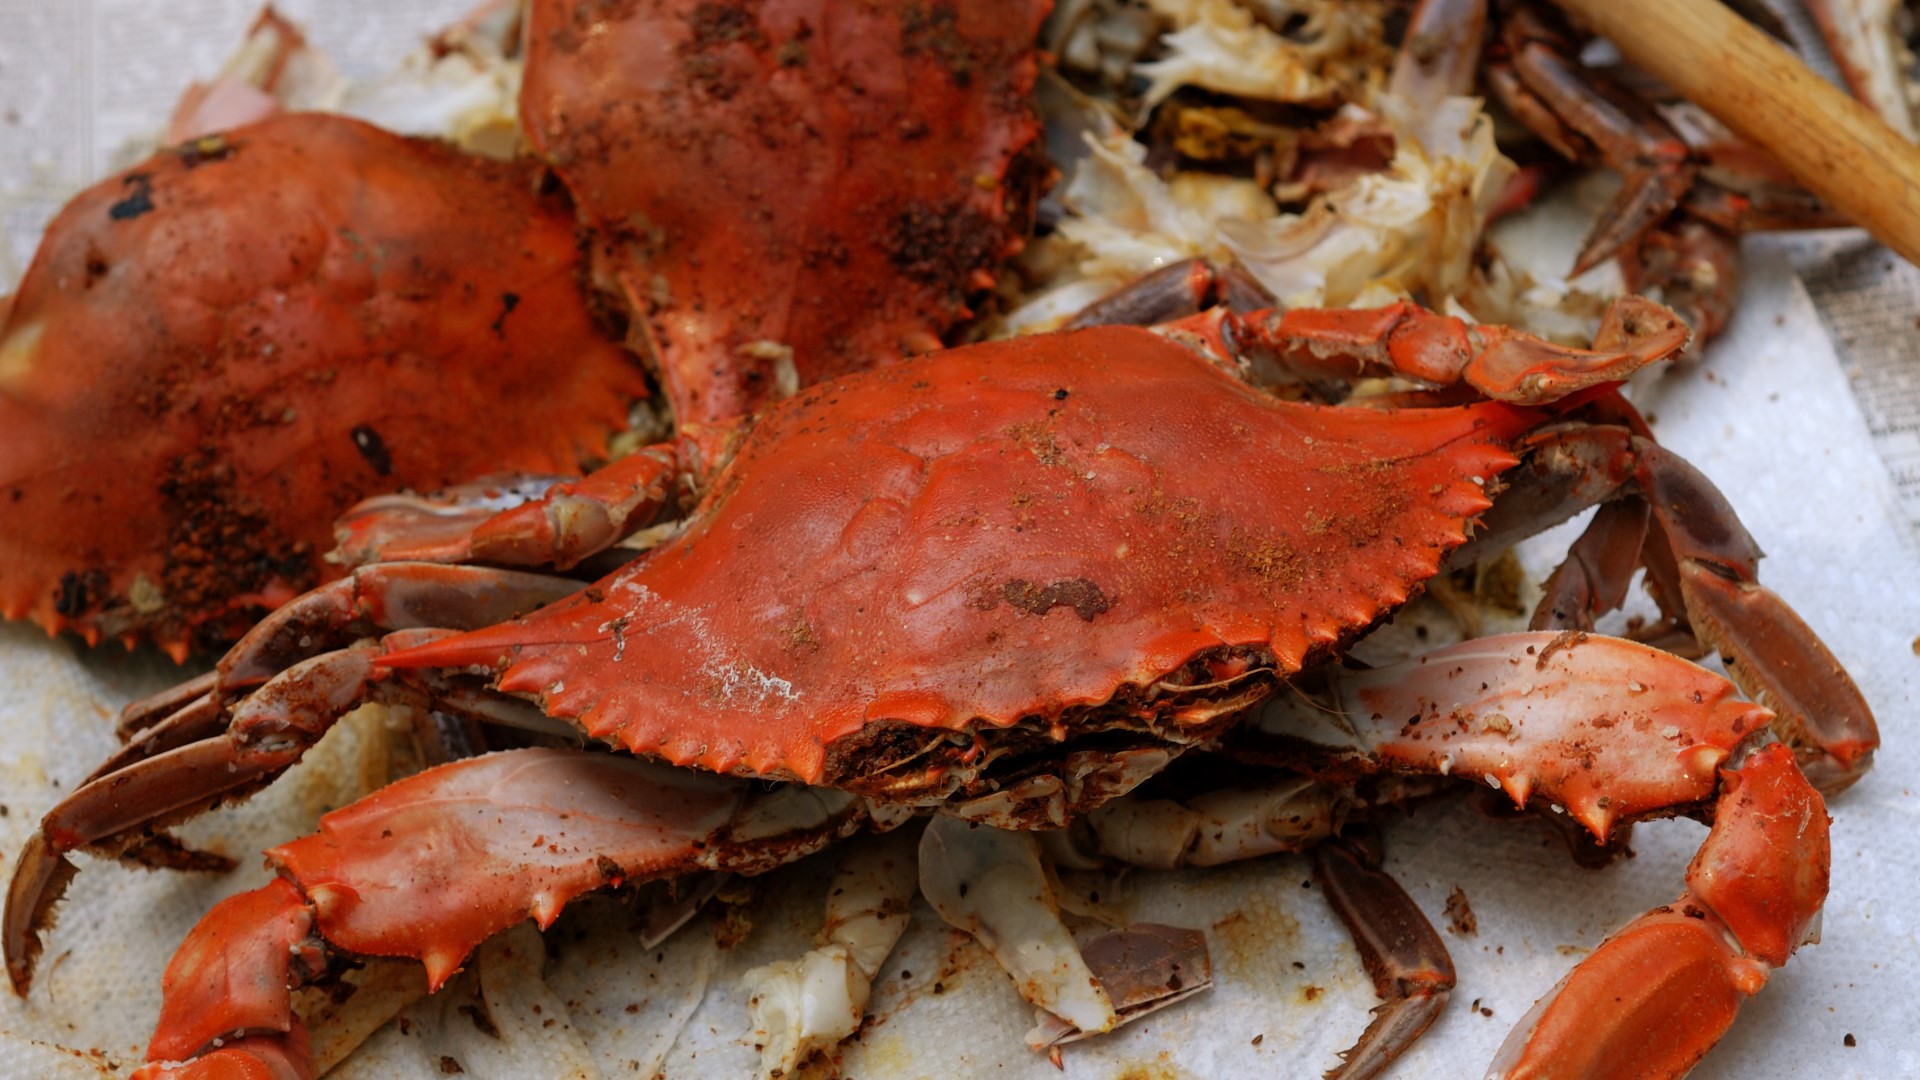 You know we take seafood seriously in the DMV, especially when it comes to Maryland blue crabs. But a viewer heard eating them can lead to vertigo. So is it true?